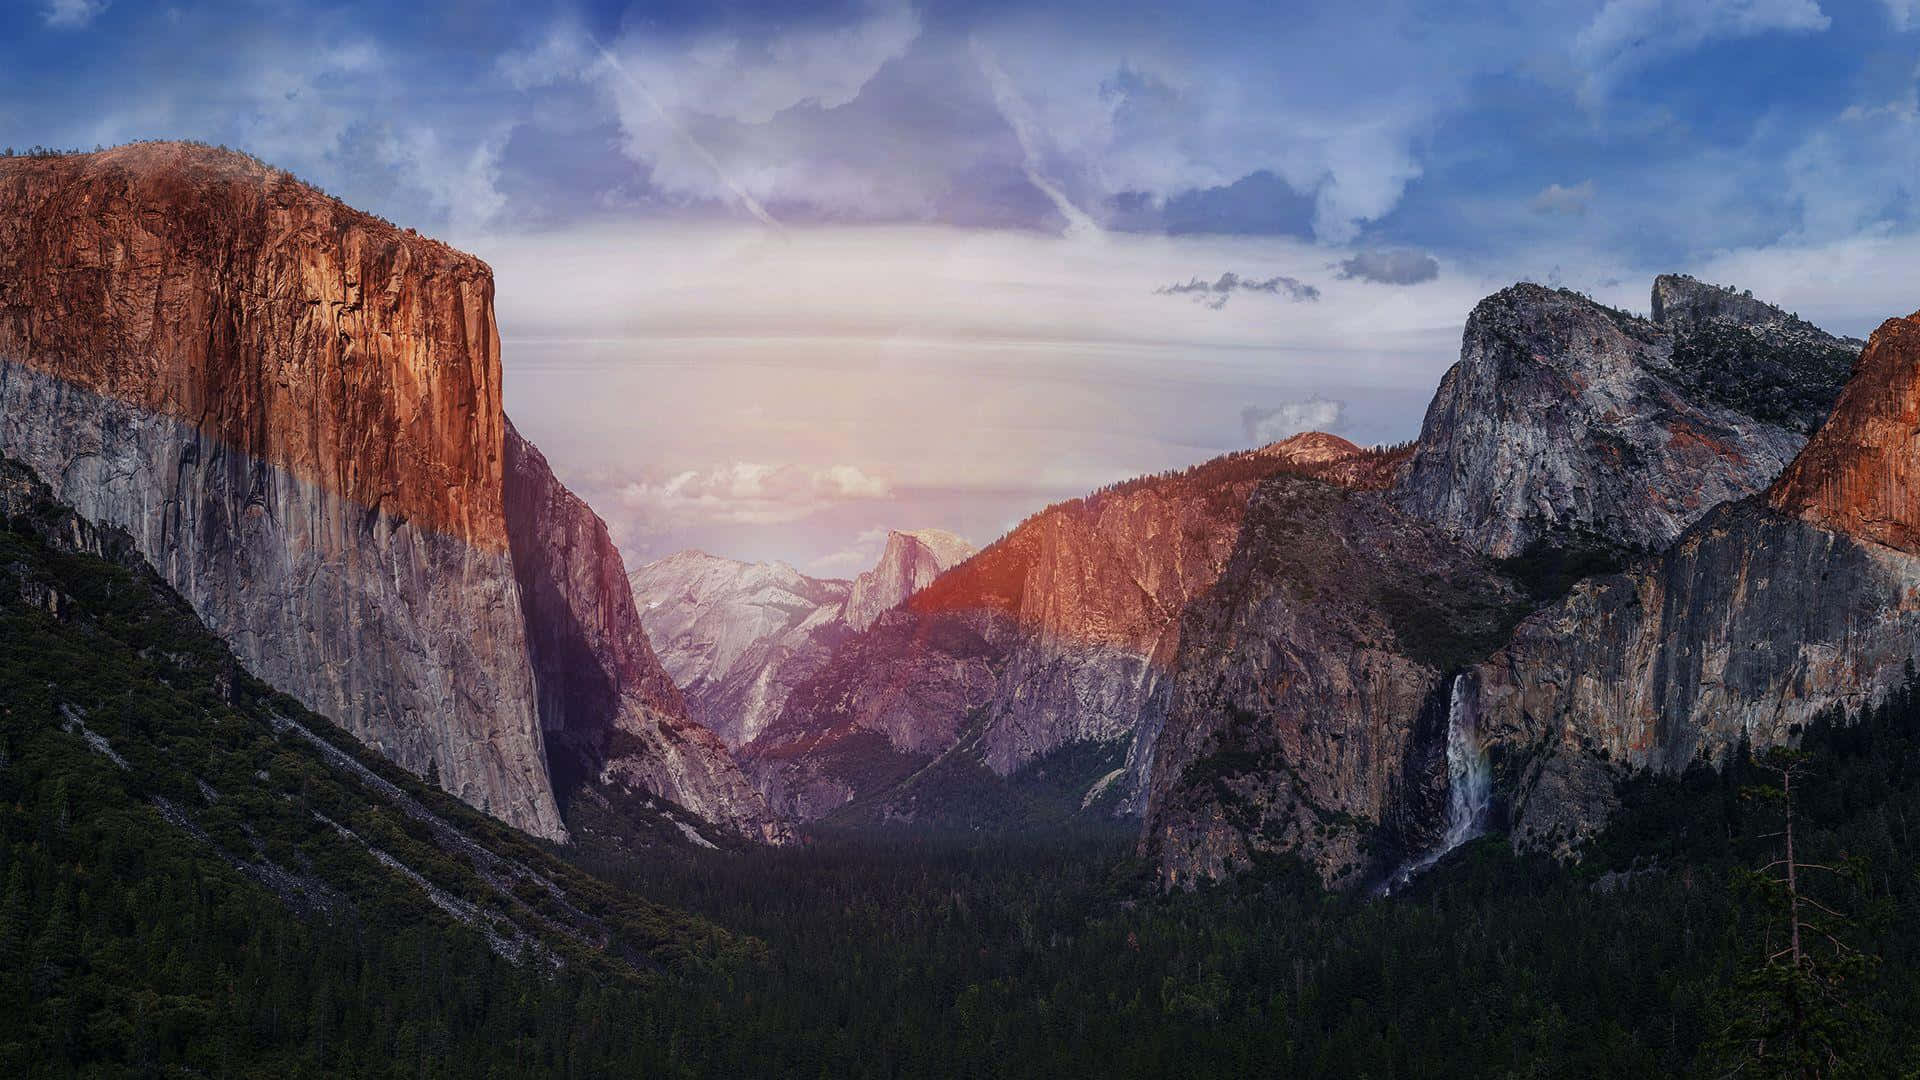 Top Fan Made Official OS X Yosemite And iOS 8 Wallpapers